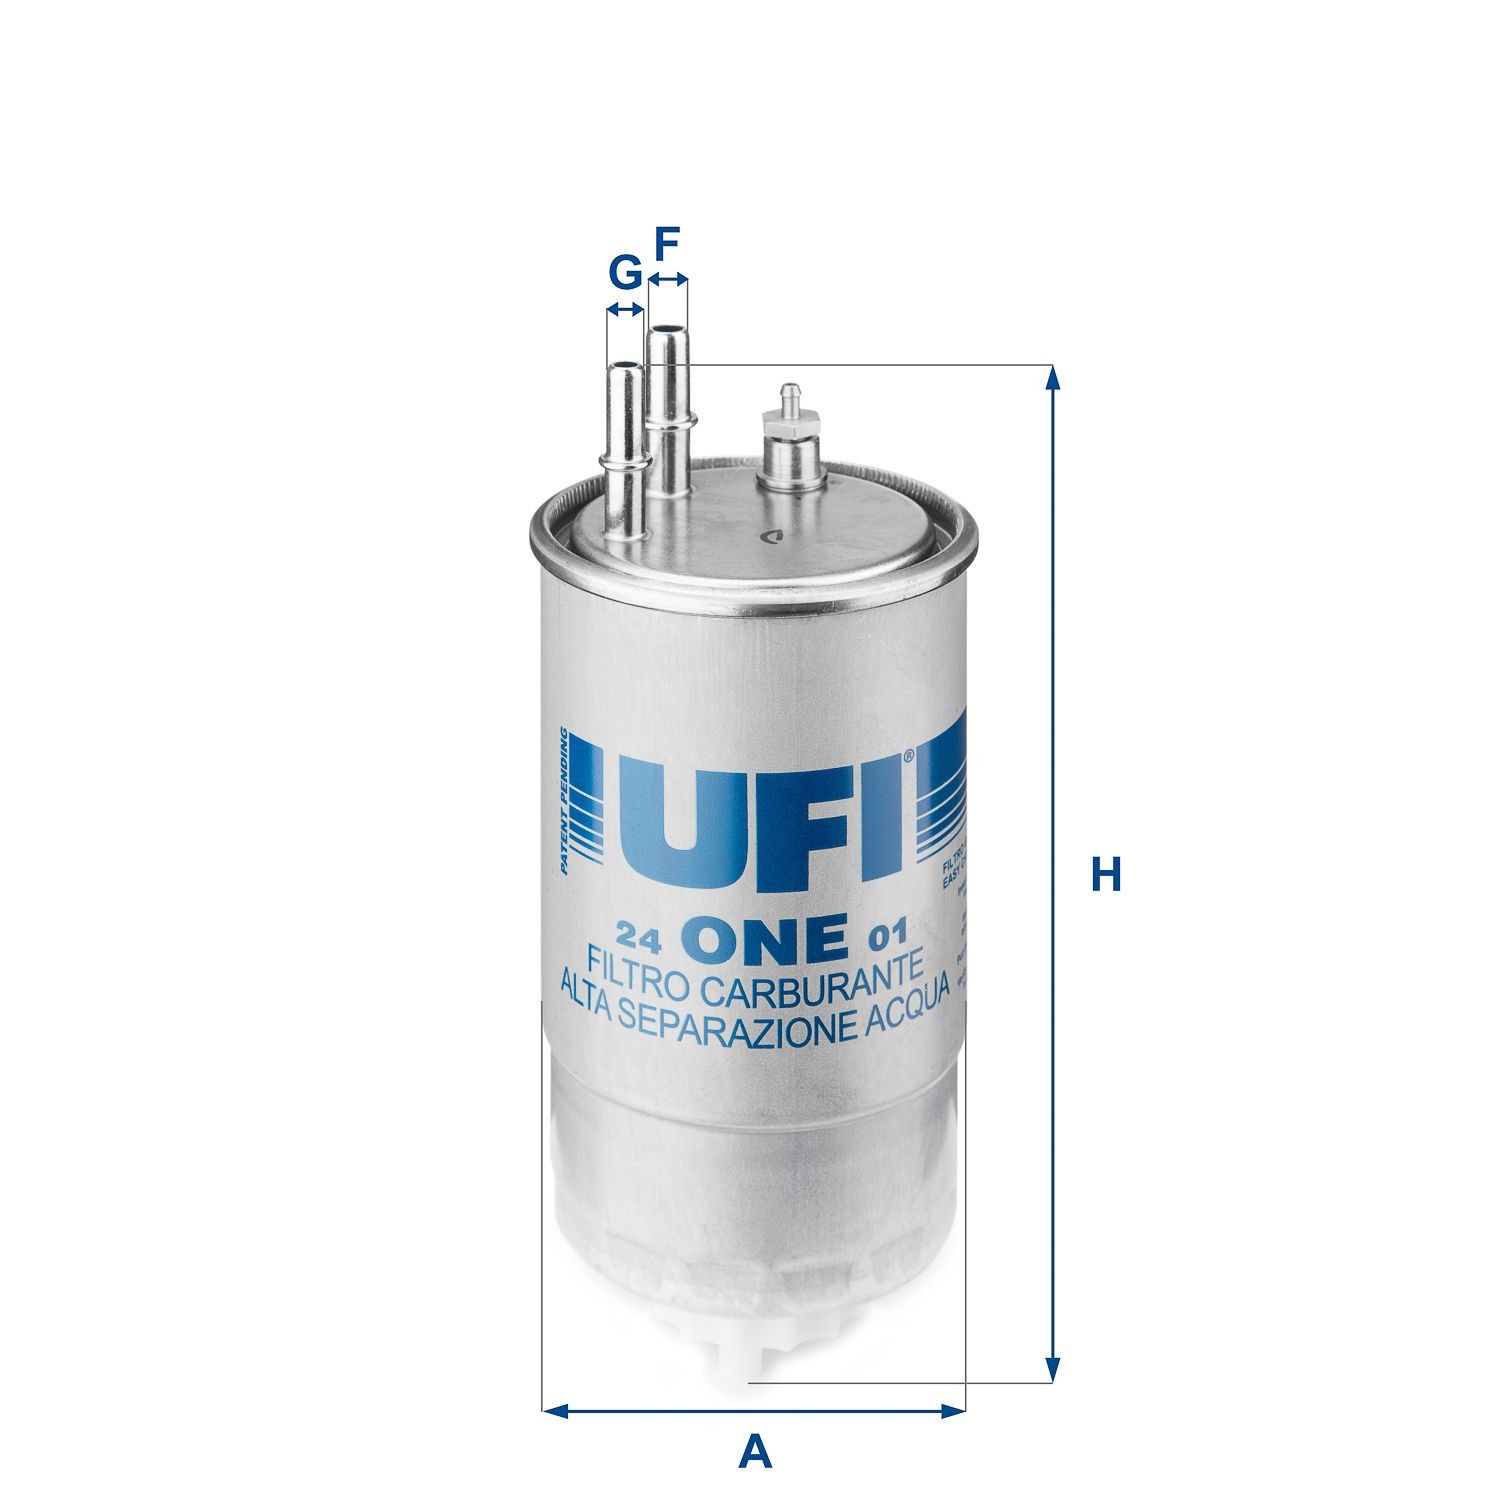 24.ONE.01 Fuel filter 24.ONE.01 UFI Filter Insert, 9,5mm, 8mm